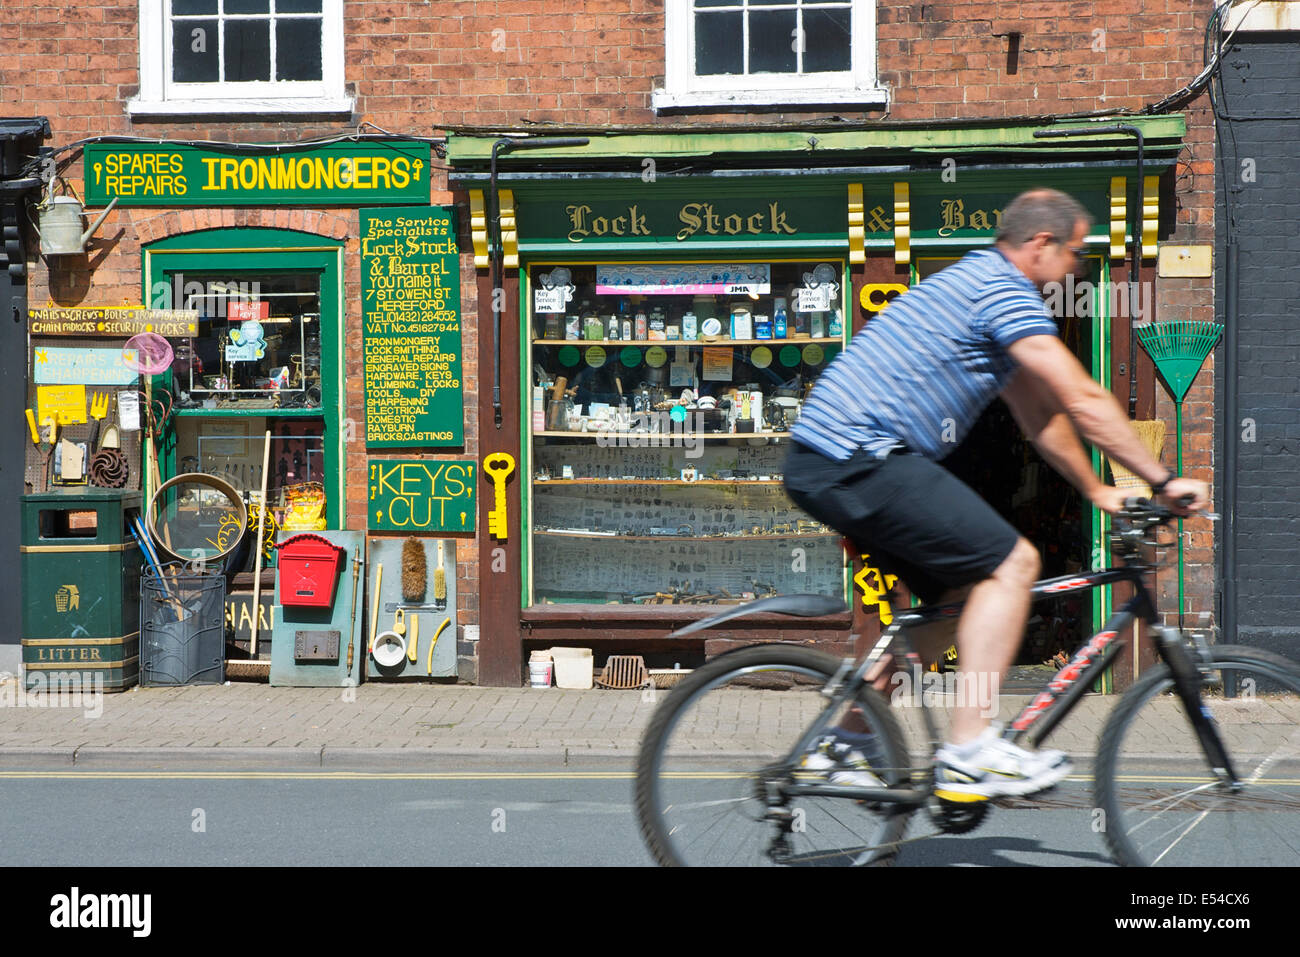 Man cycling past Ironmonger's shop in Hereford, Herefordshire, England UK Stock Photo